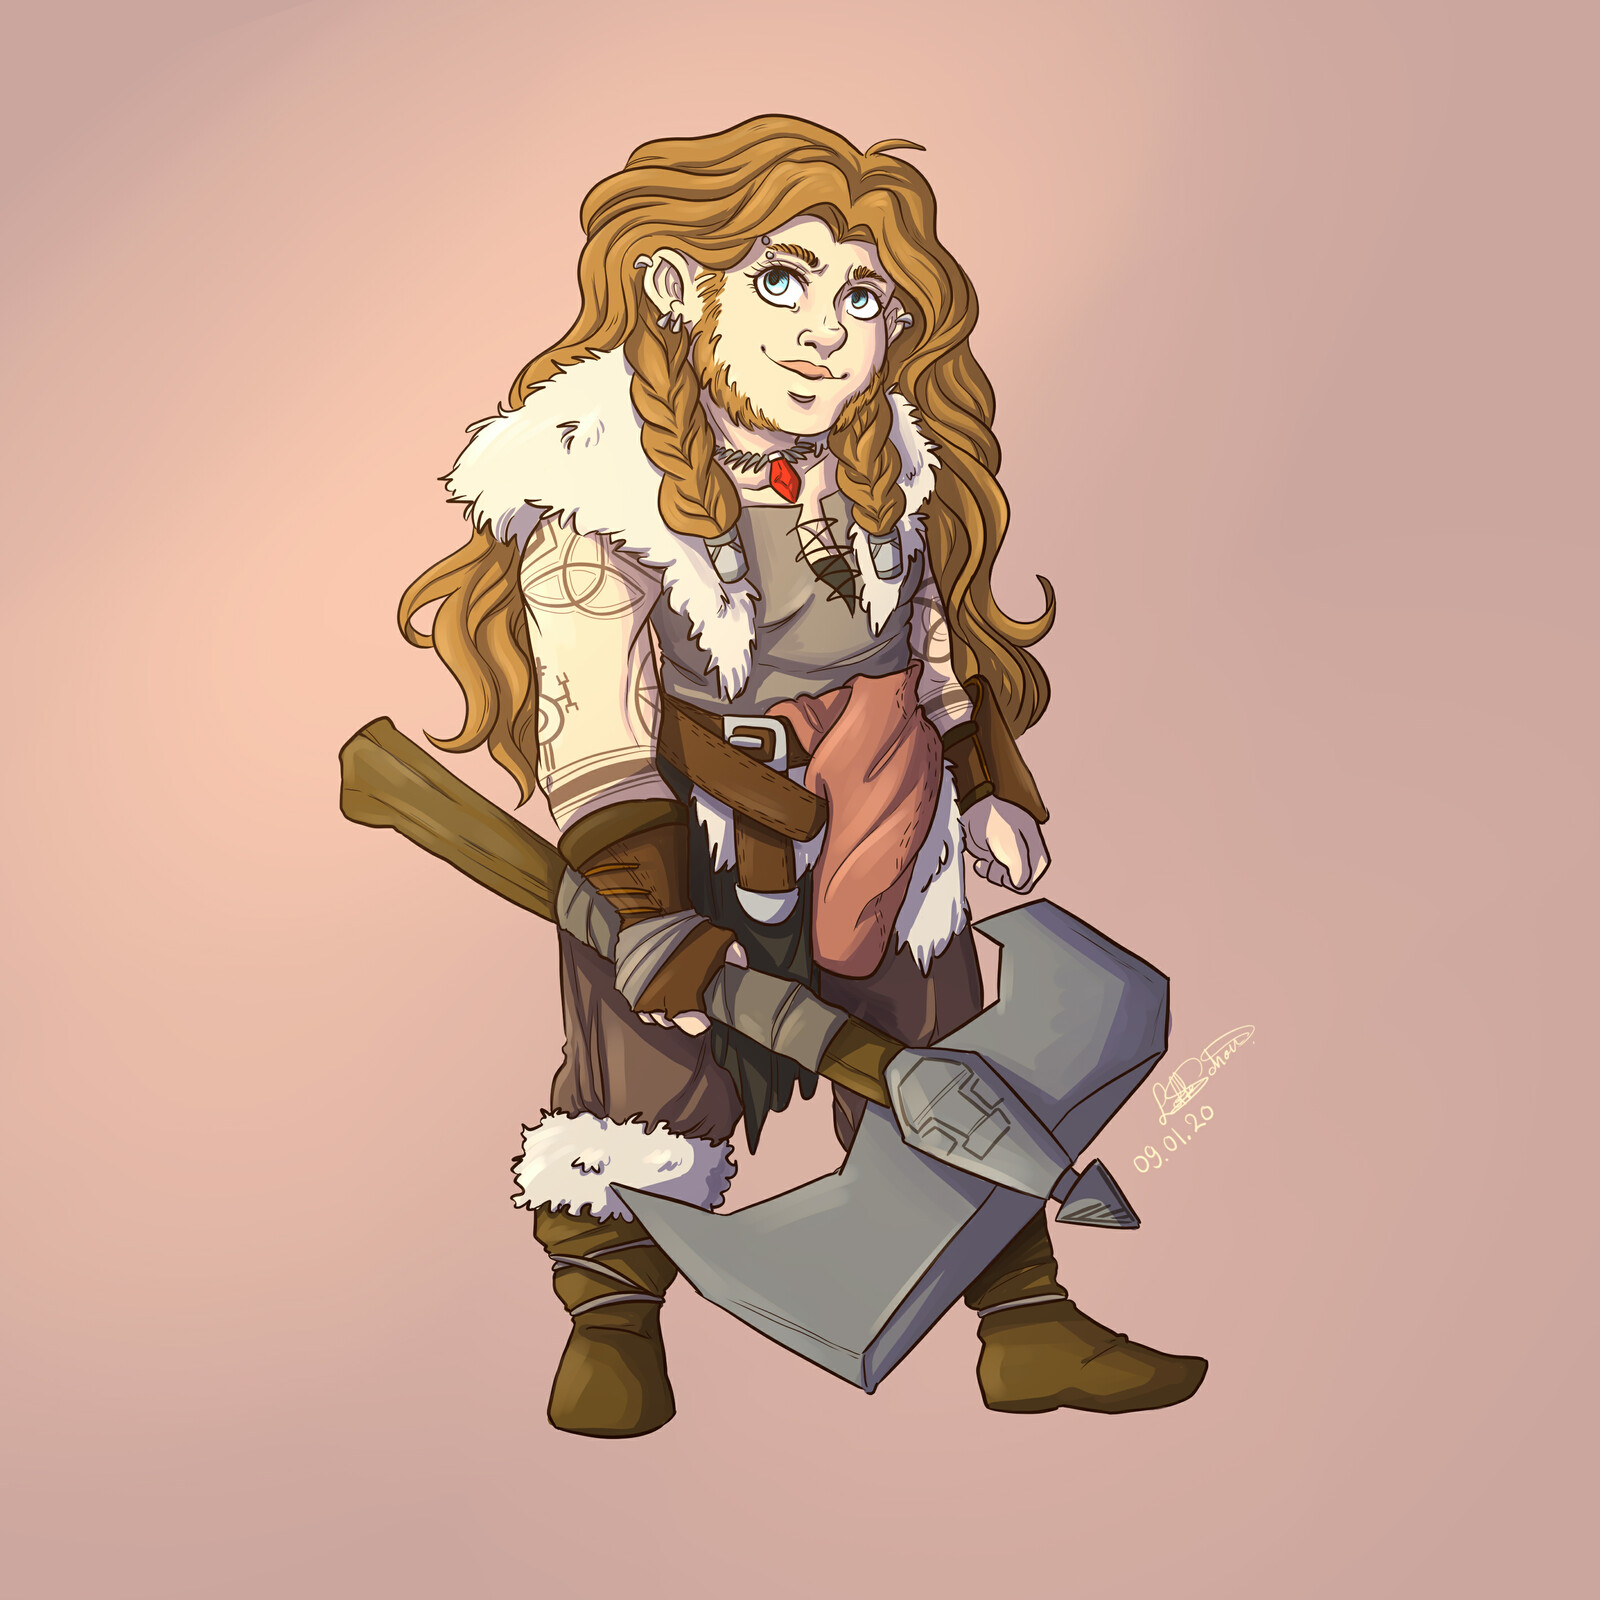 My D&amp;D character from my current campaign